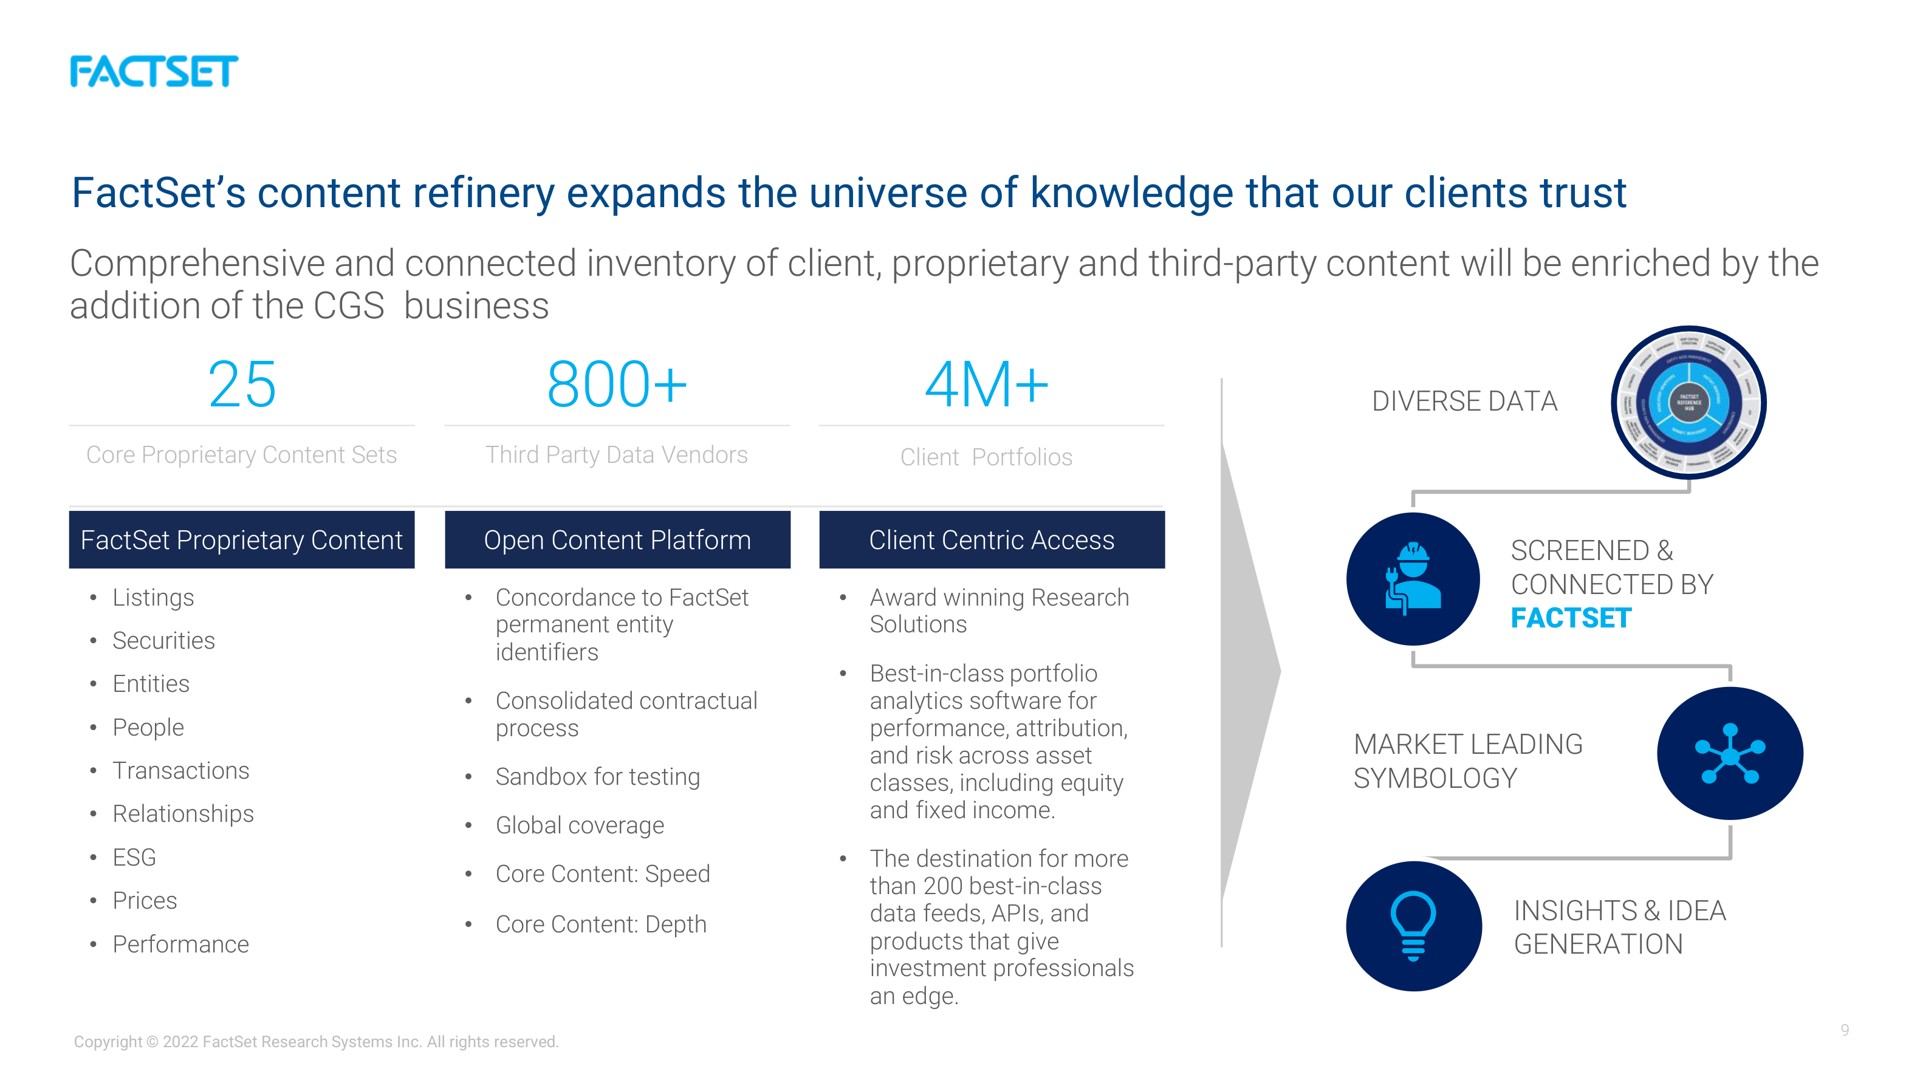 content refinery expands the universe of knowledge that our clients trust | Factset